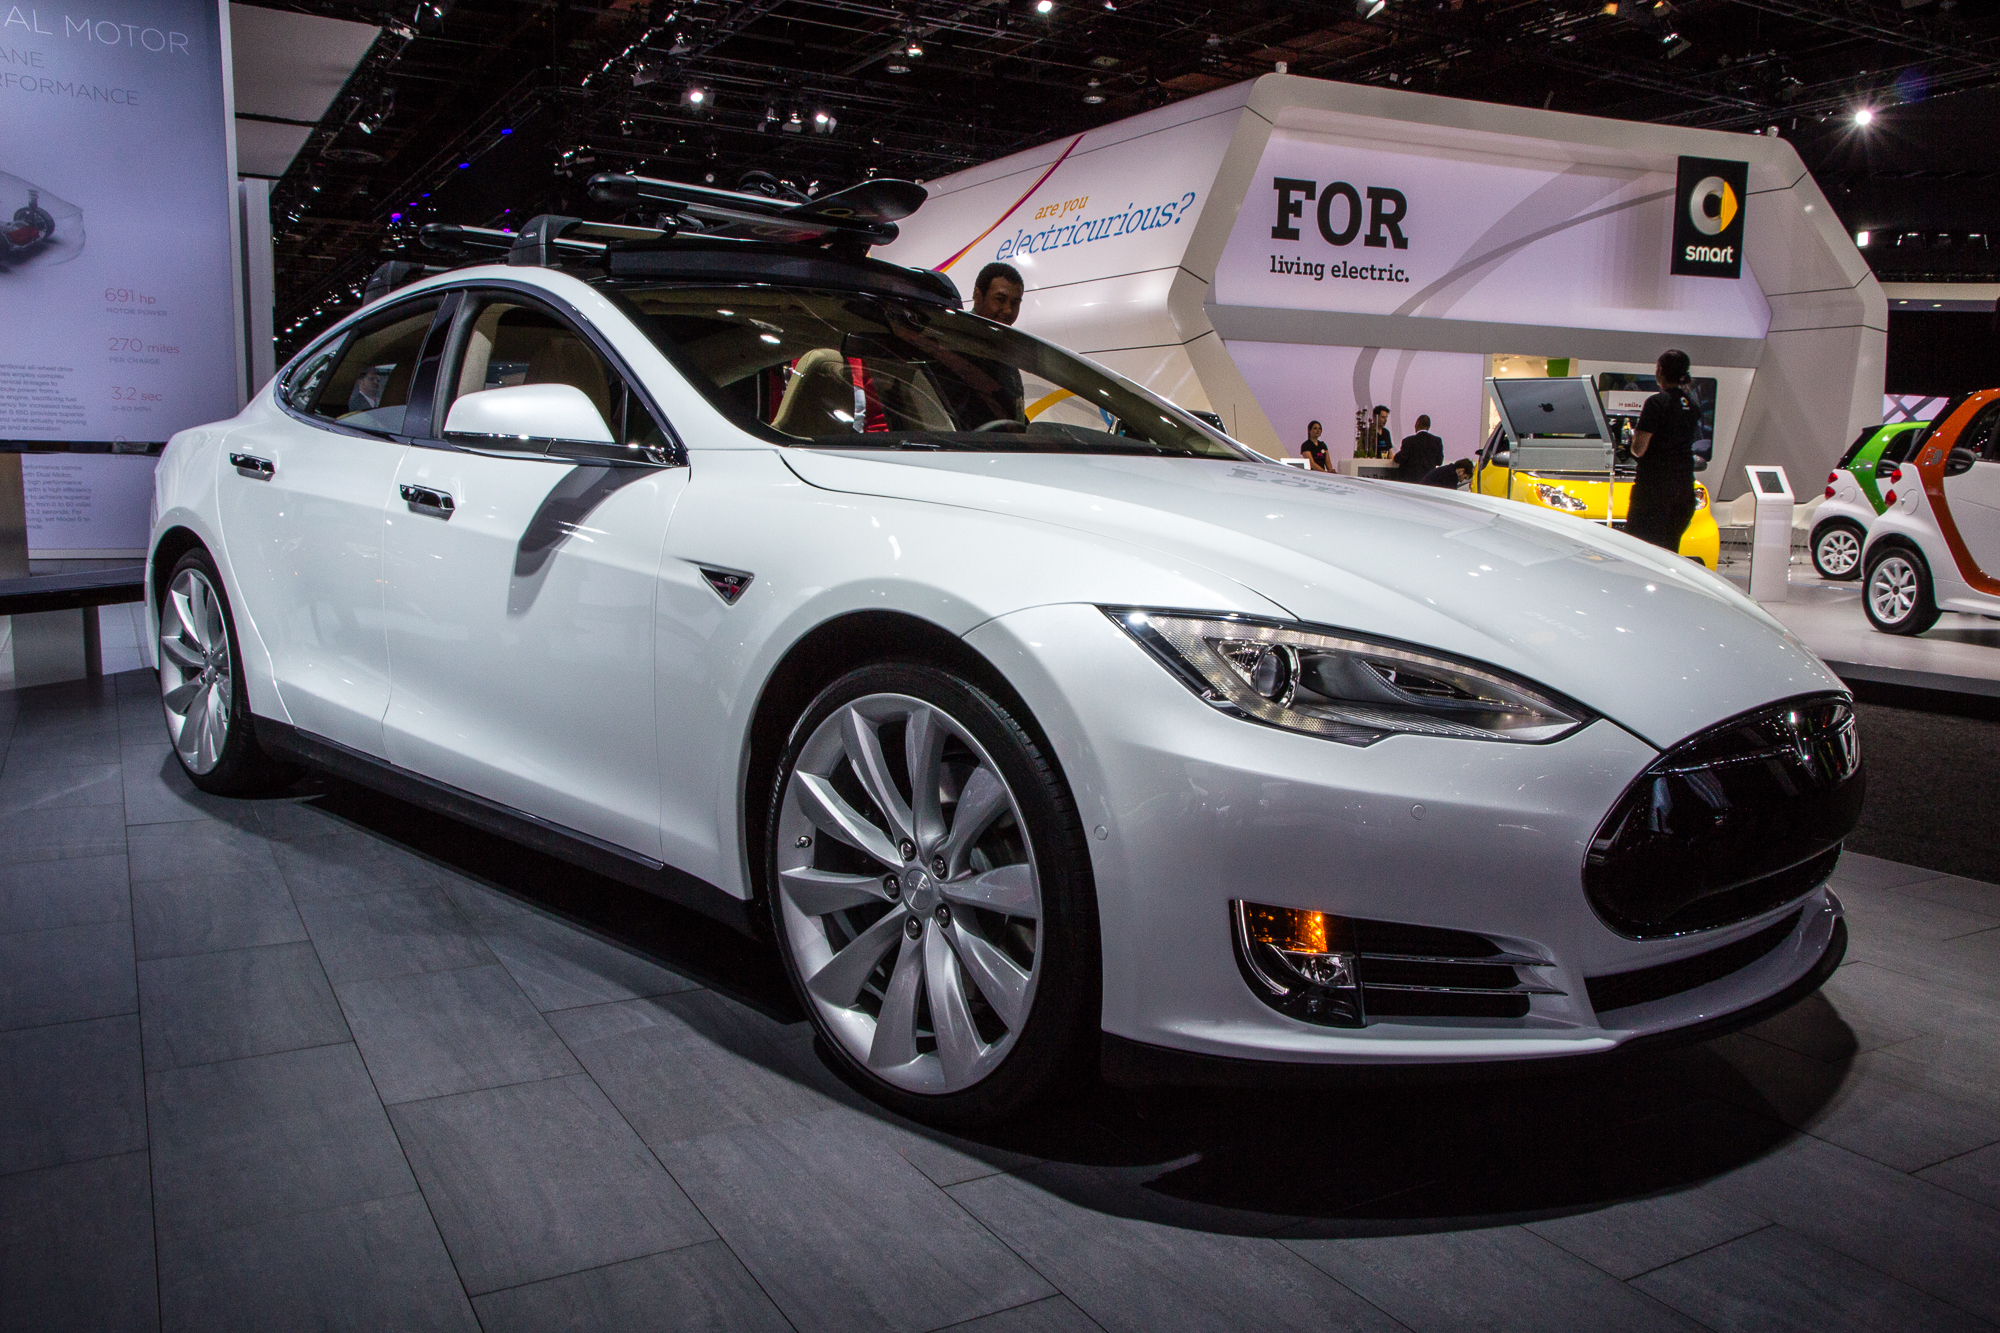 How To Drive A Tesla Model S Electric Car Free For 18 Months